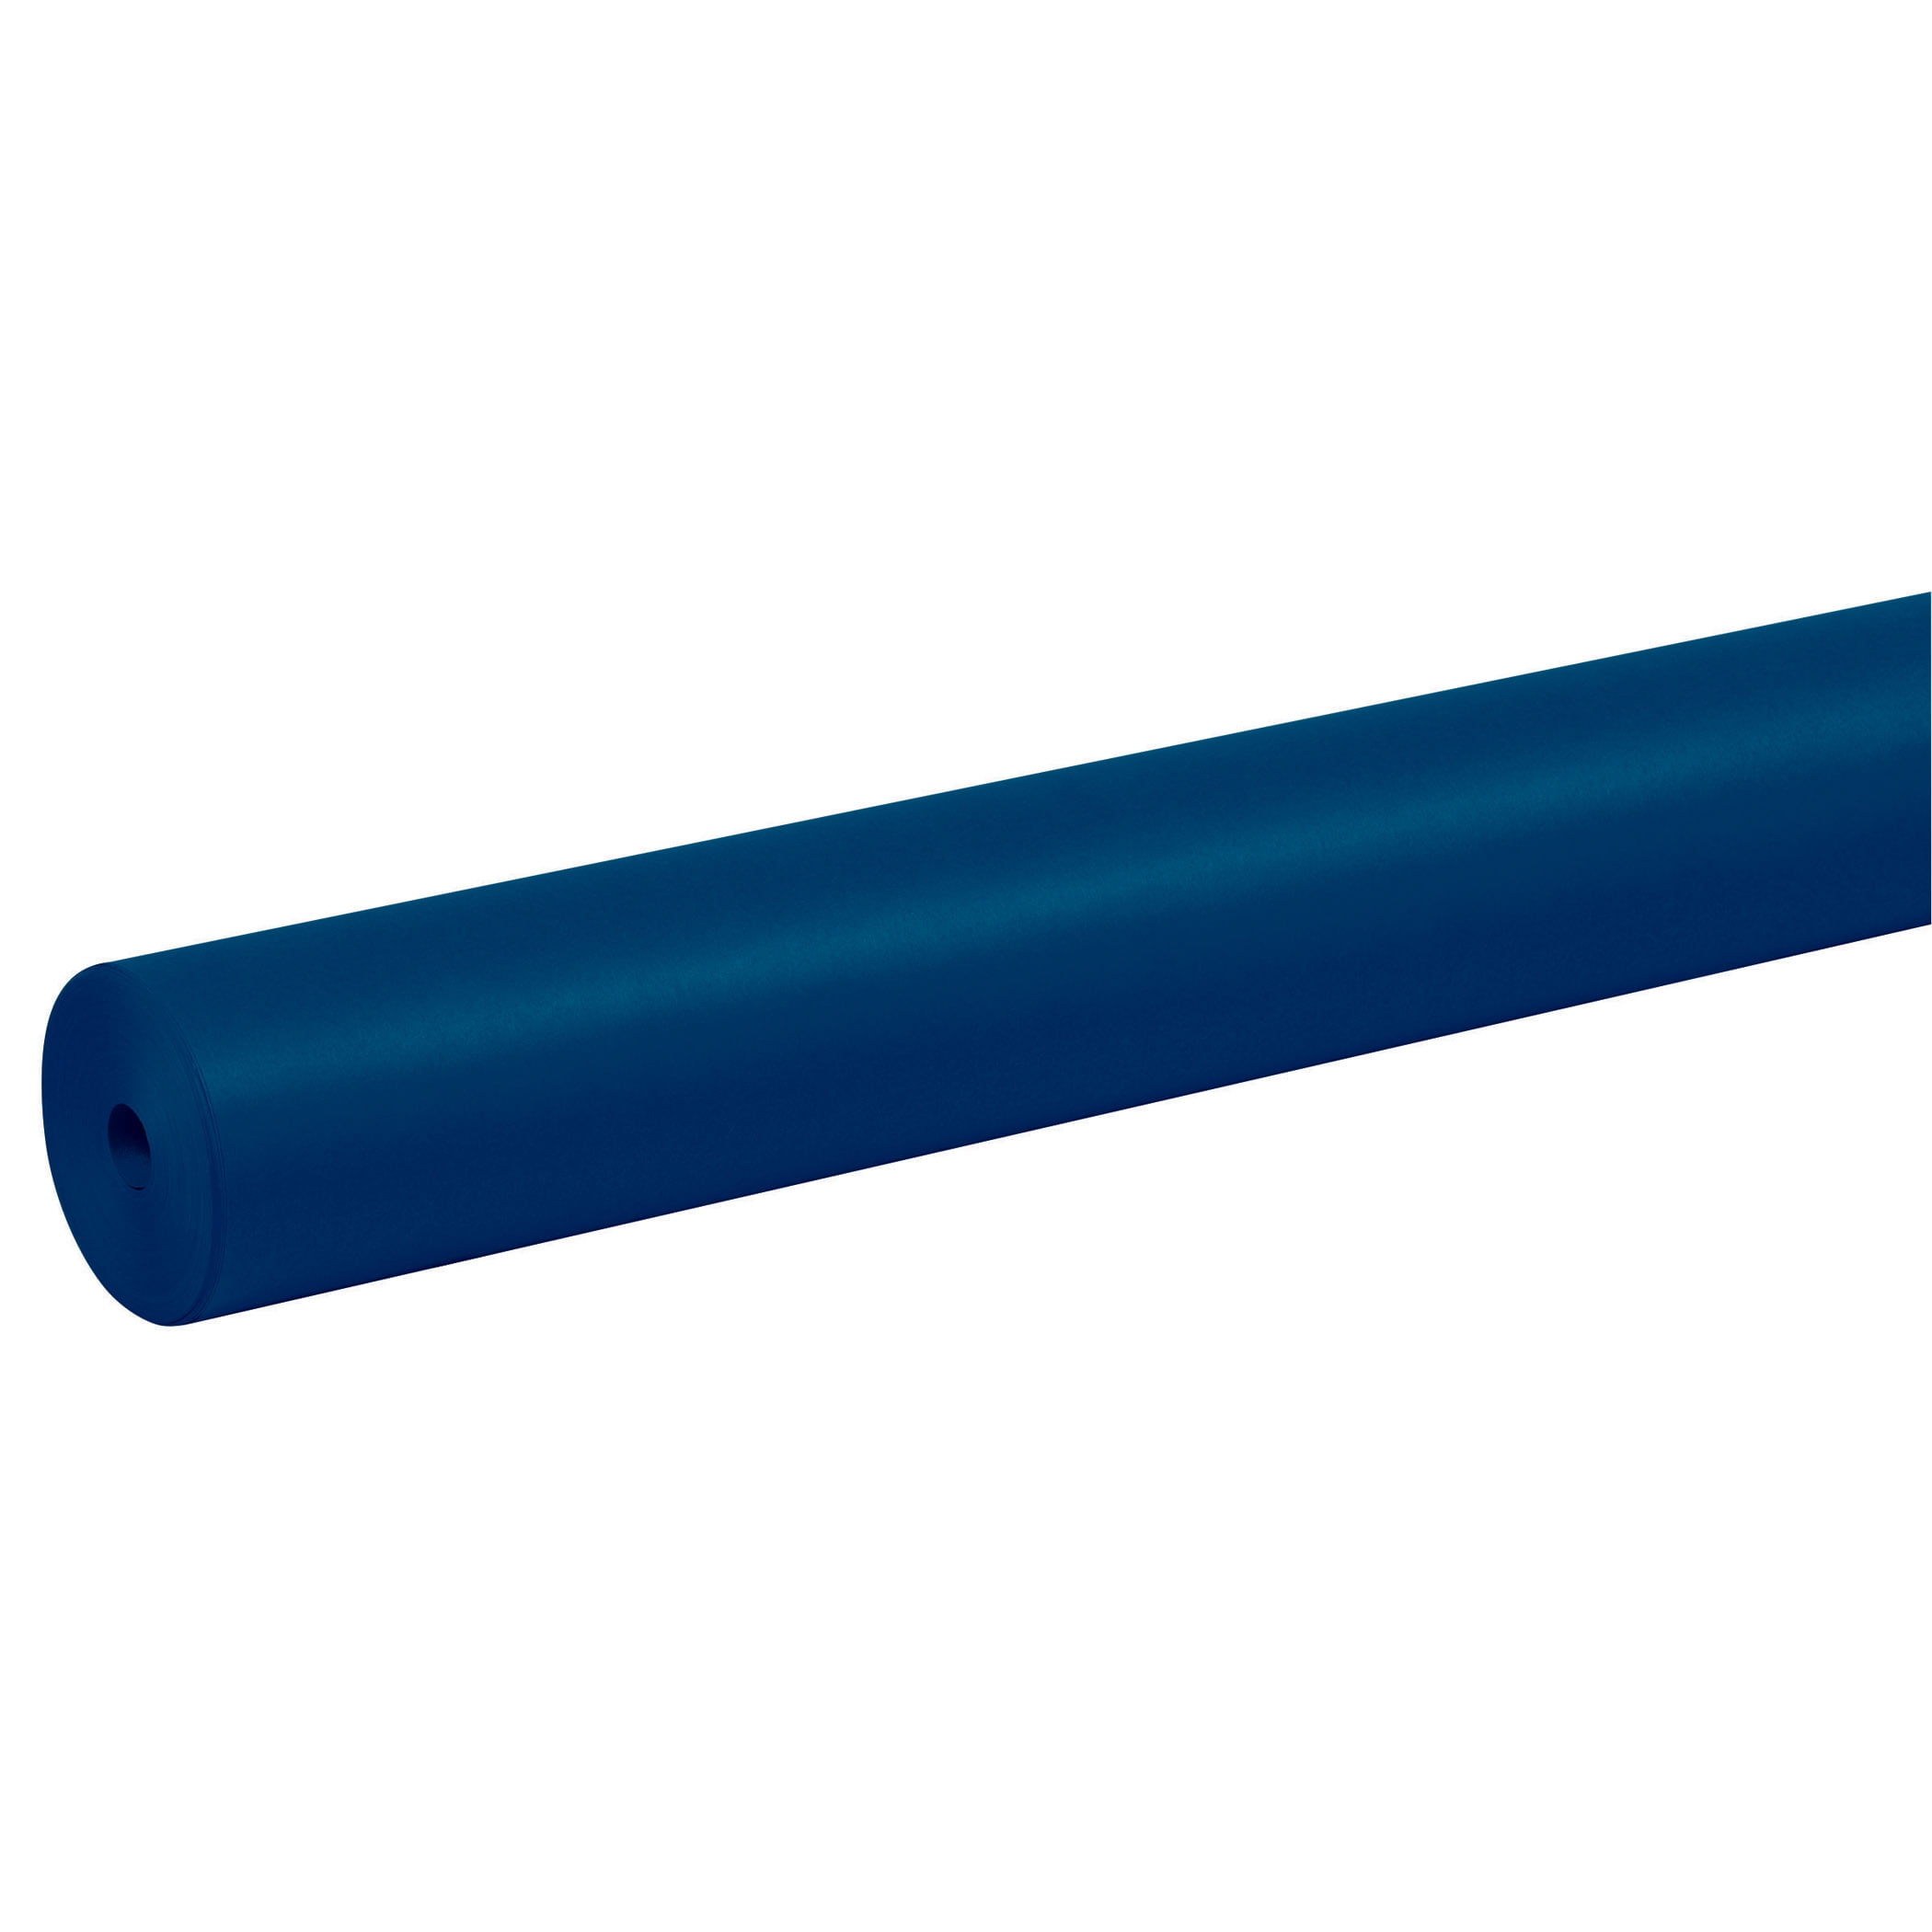 48" X 200 FT Bright Blue Pac67174 for sale online Pacon 67174 Spectra ArtKraft Duo-finish Paper 48 Lbs 